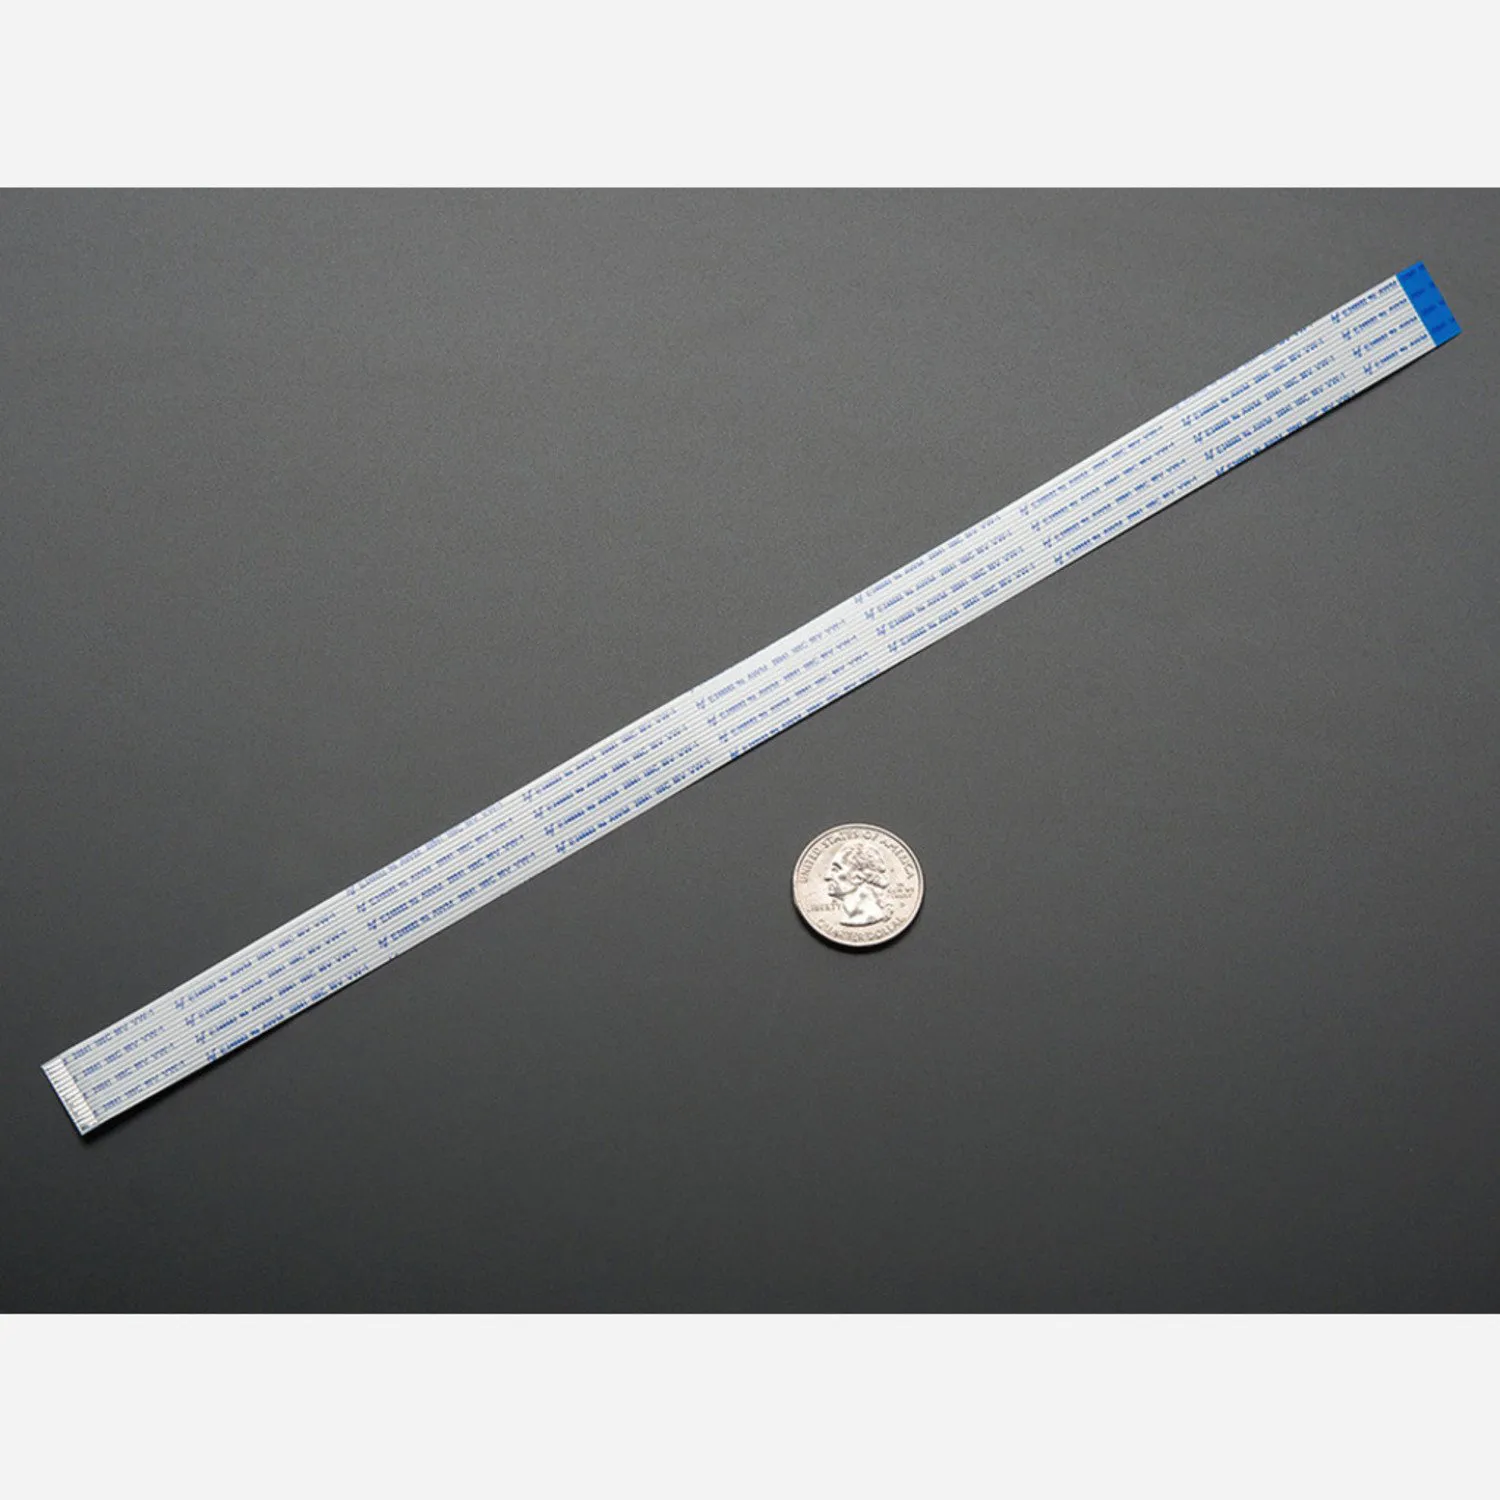 Photo of Flex Cable for Raspberry Pi Camera - 300mm / 12